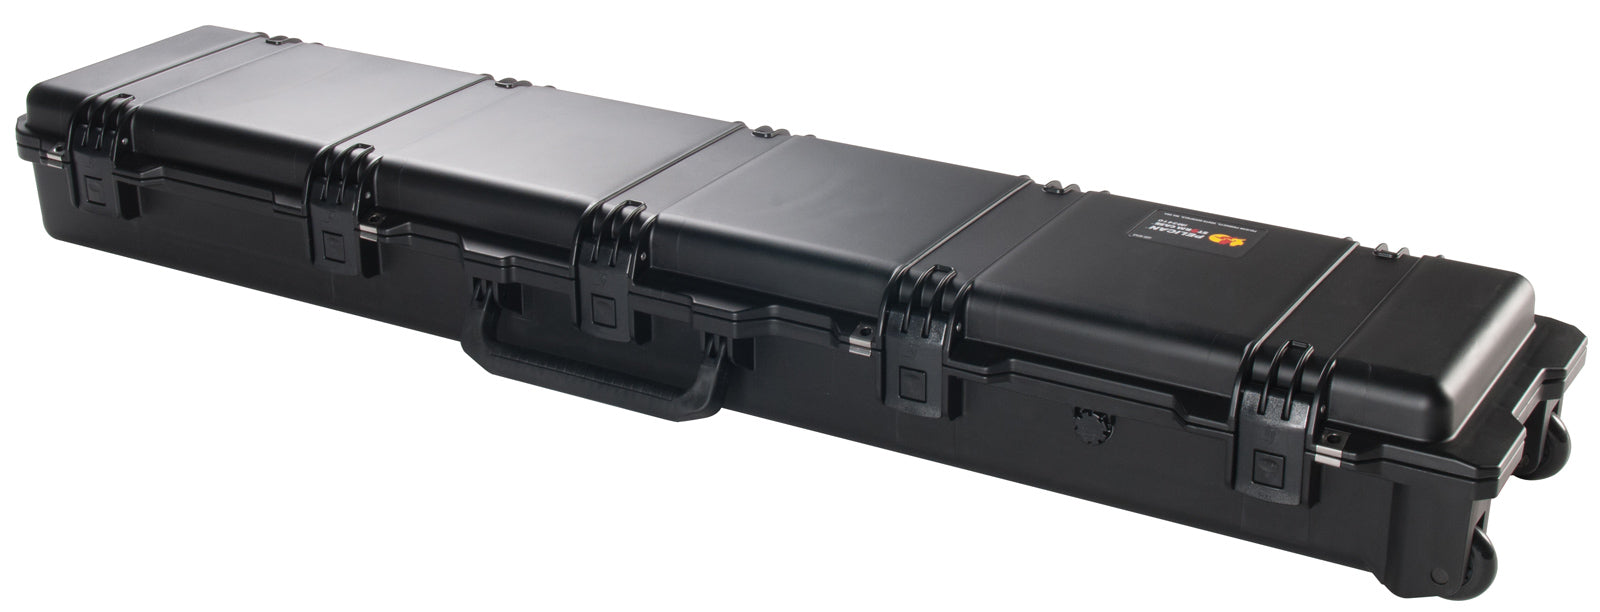 Pelican Storm iM3410 Watertight Recessed Wheeled Long Case